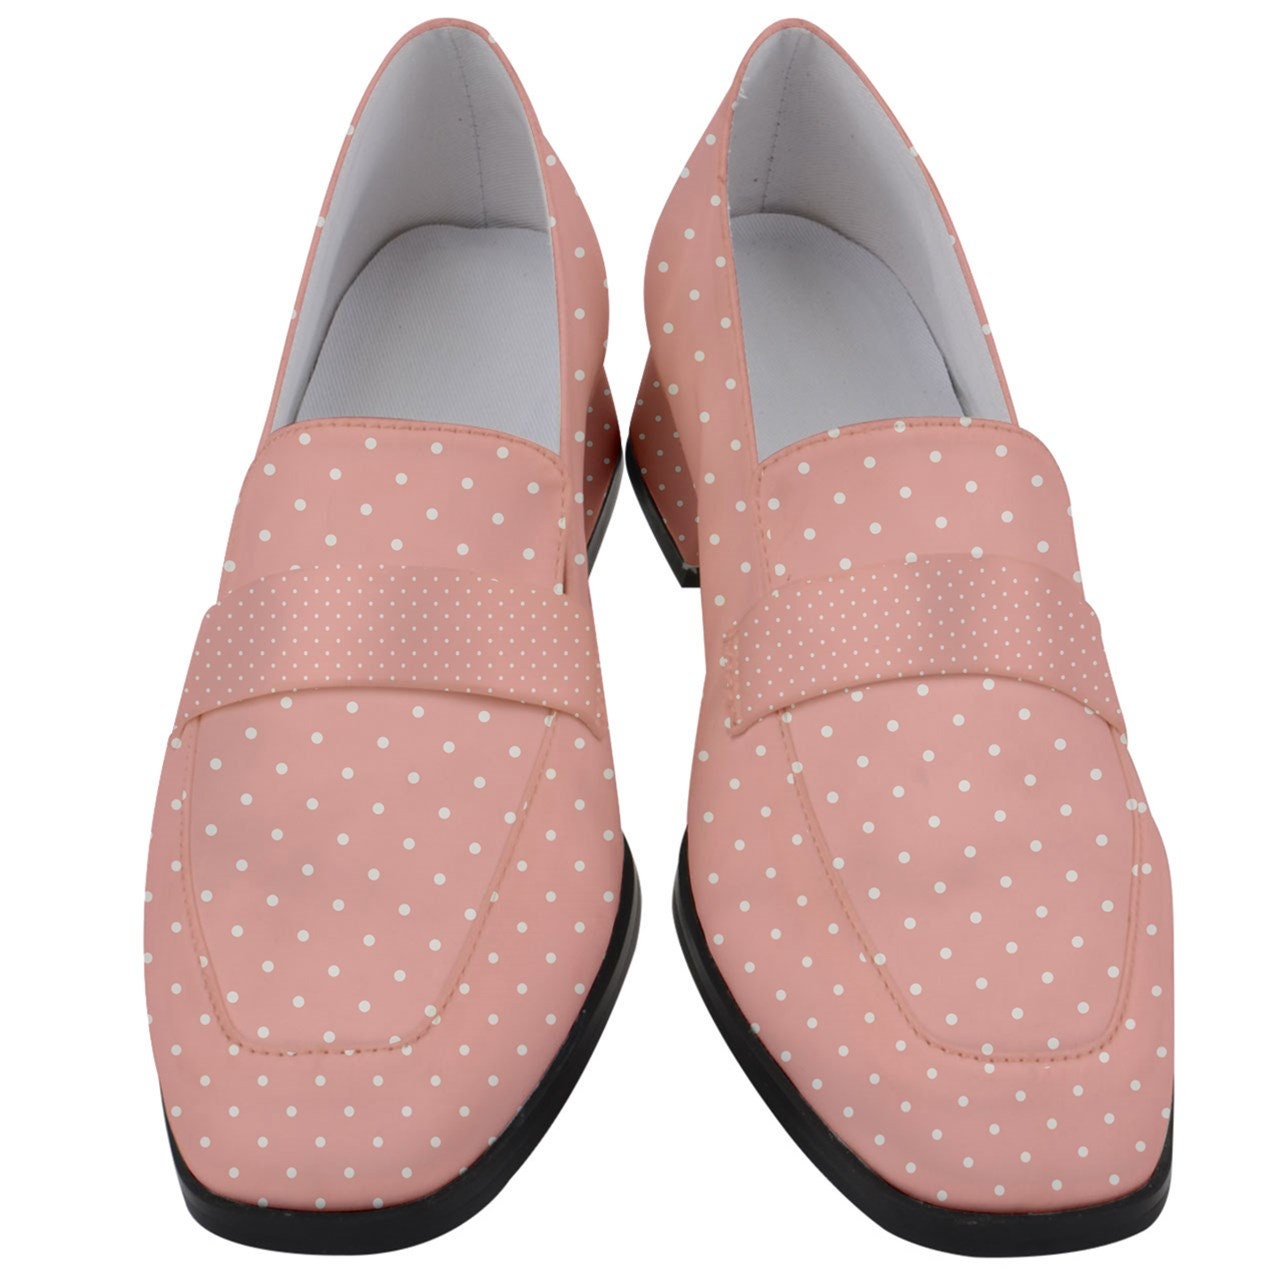 Pink Loafers, Loafers Women, Pink Shoes Women, Loafers Vintage Style, Pin up Loafers, Swiss Dot Loafers, Chunky Heels Women, retro shoes